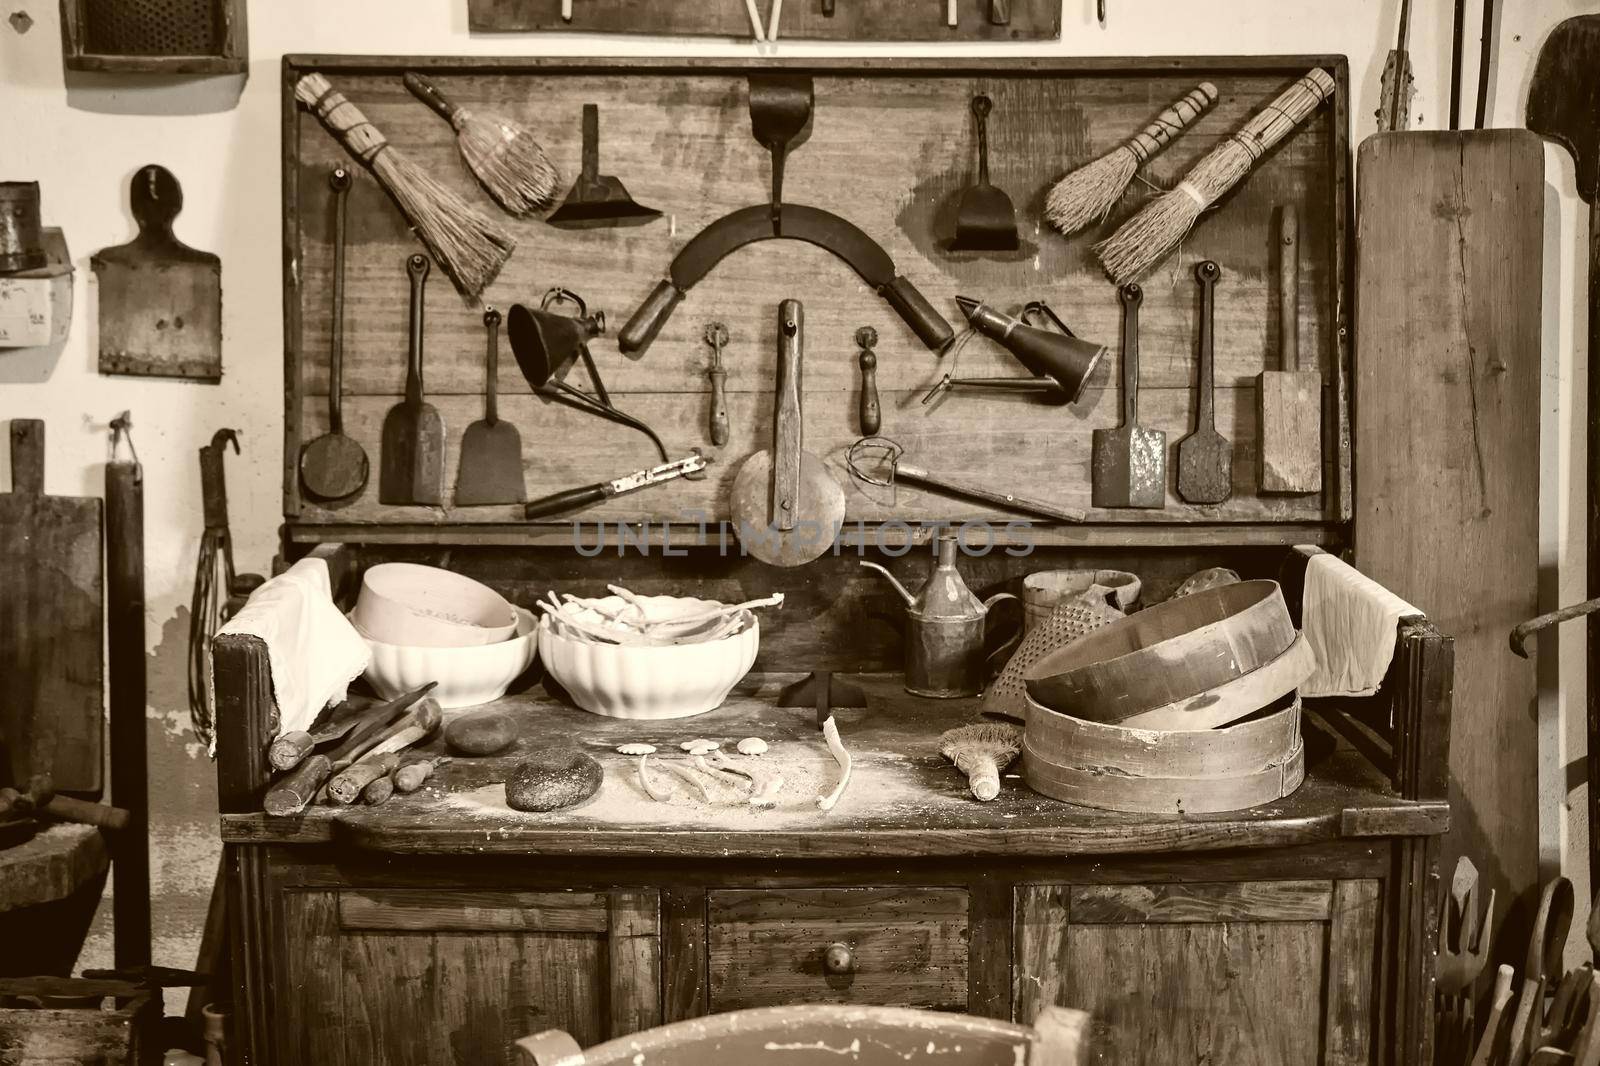 vintage photo of kitchen tools (pots, vases, jugs, etc.) and various containers